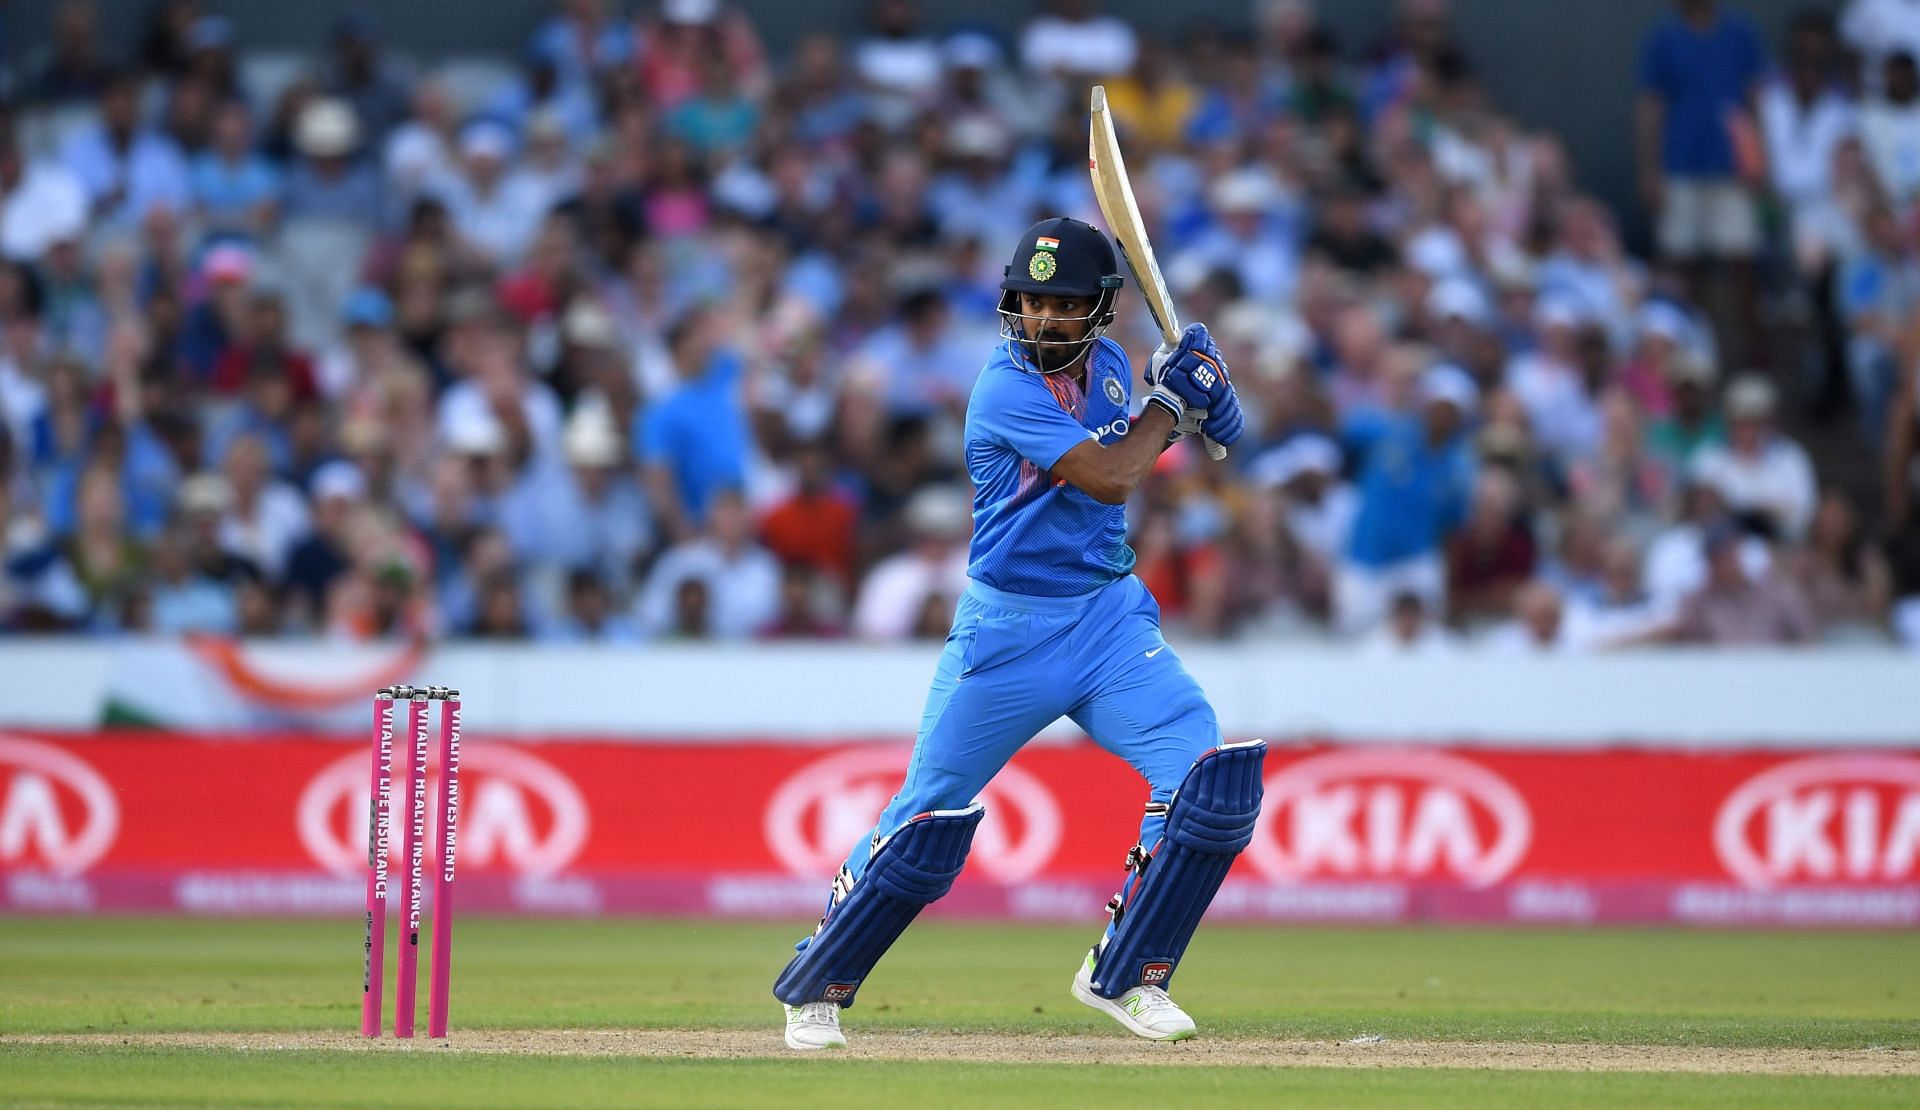 KL Rahul will be leading India against South Africa. Pic: Getty Images